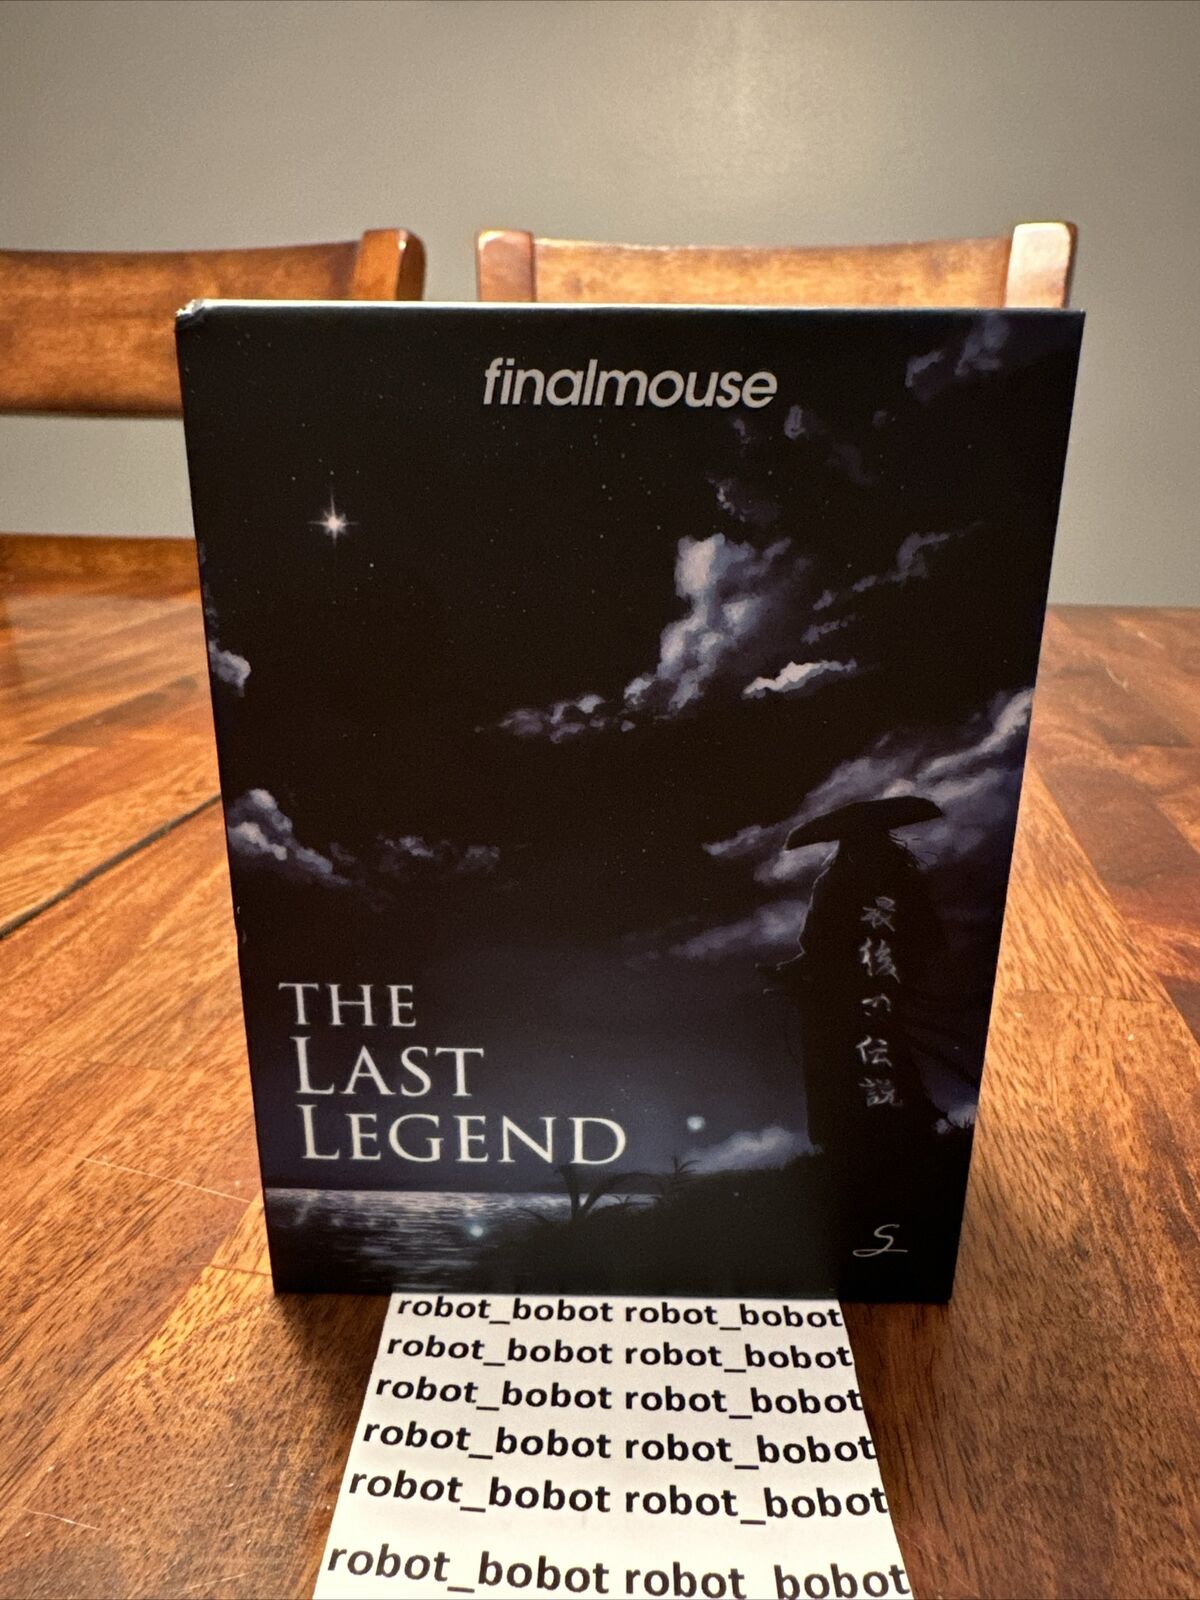 FinalMouse - The Last Legend - Small w/ Centerpiece Code (SEALED)